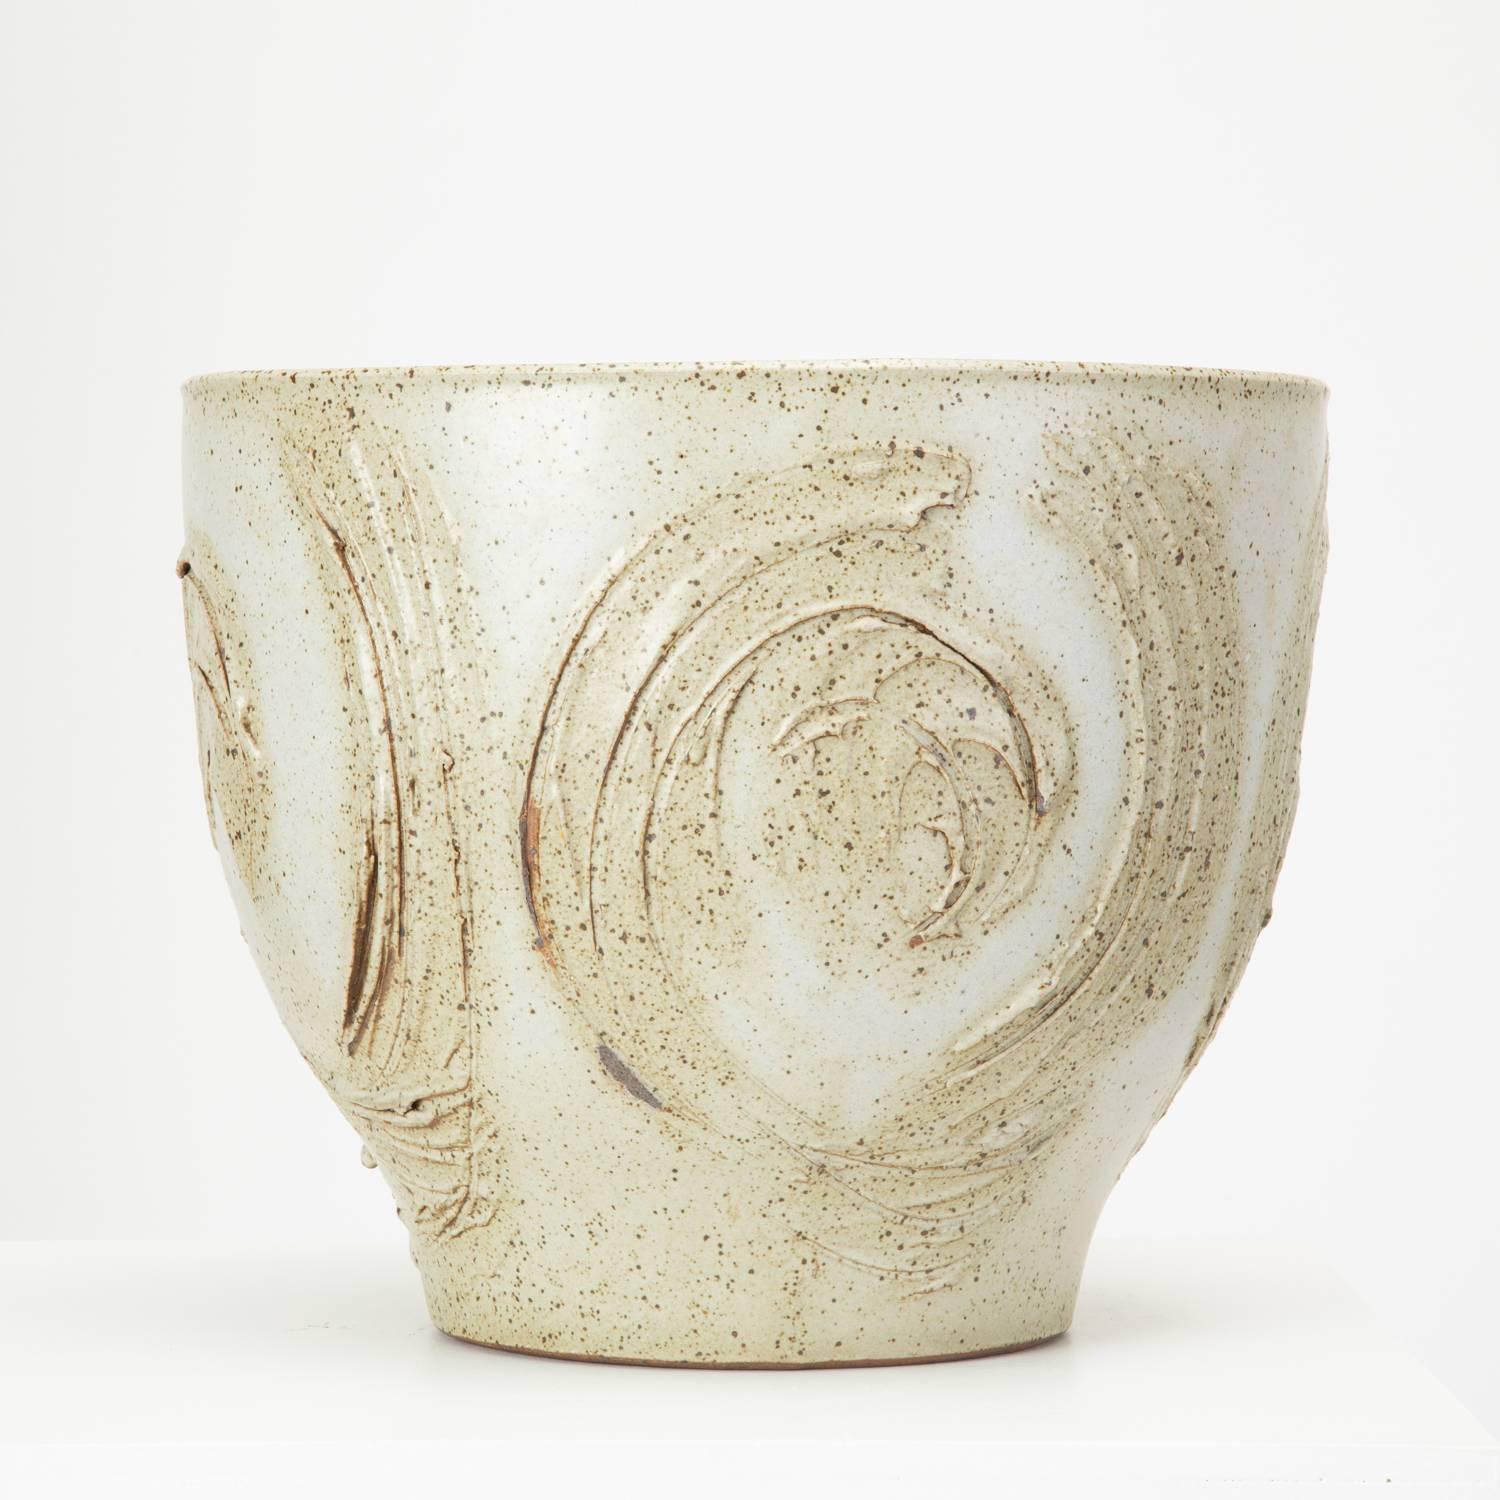 A gray spatter-glazed urn planter designed by David Cressey for Architectural Pottery's 1960s Pro/Artisan collection. The slip-cast piece has a bowl shape, tapering to a smaller foot and features painterly ridges and incisions in a rounded pattern